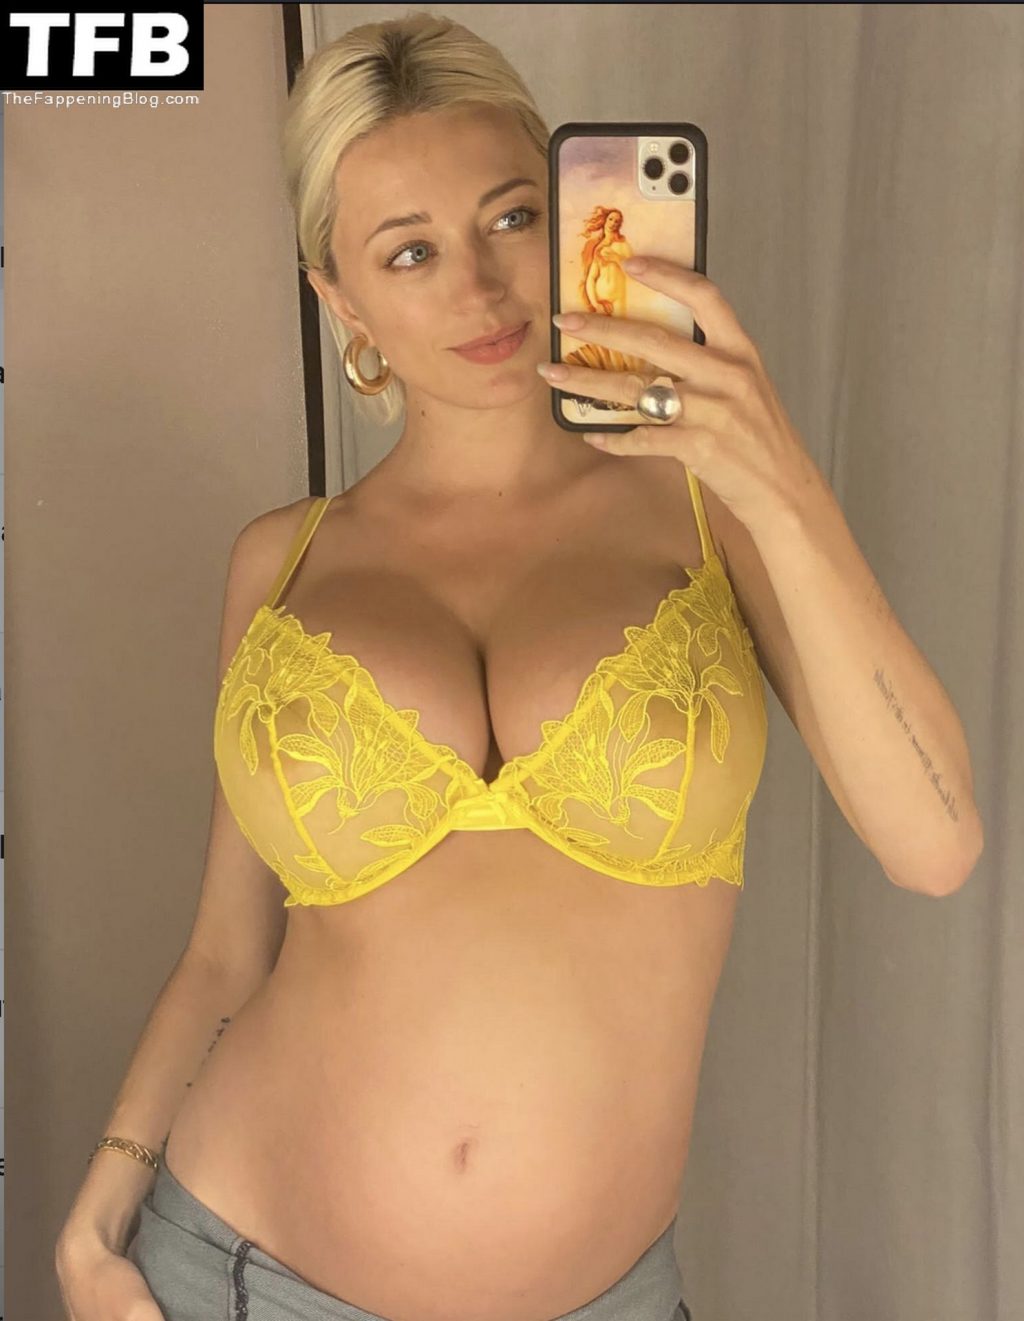 Caroline Vreeland Shows Off Her Huge Pregnant Boobs in a Lace Bra (6 Photos)